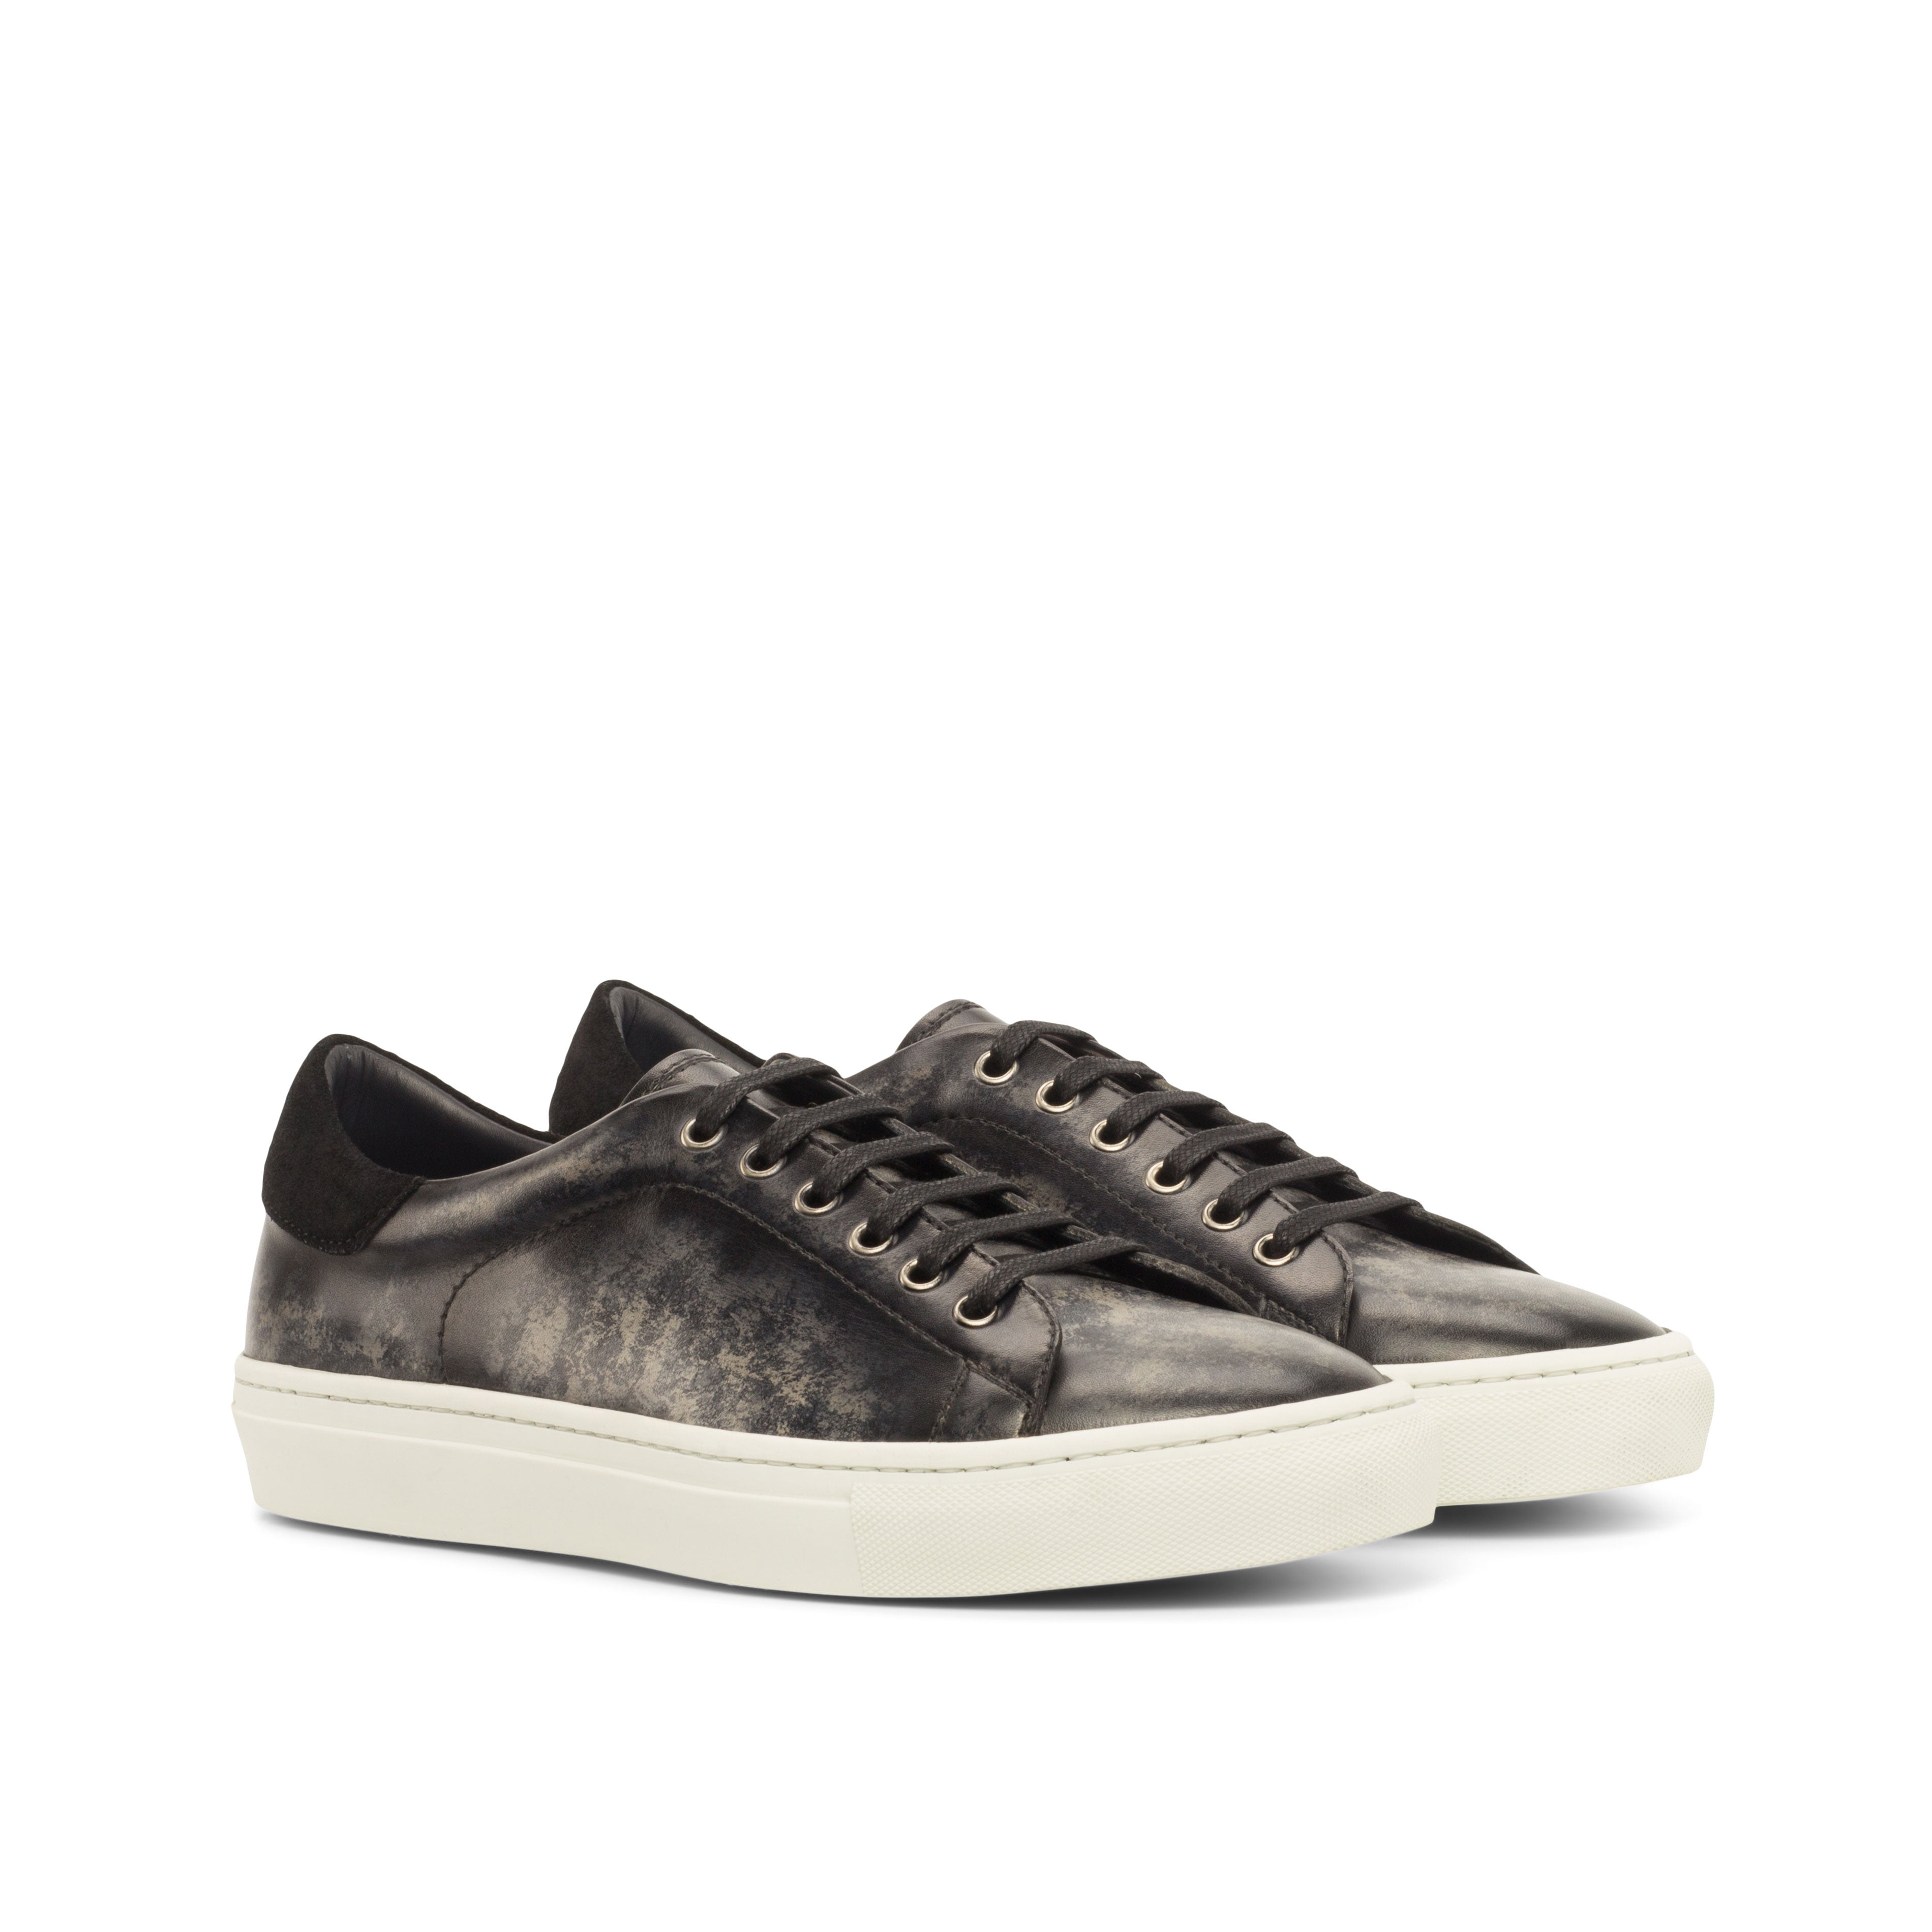 Sneakers Marble grey patina